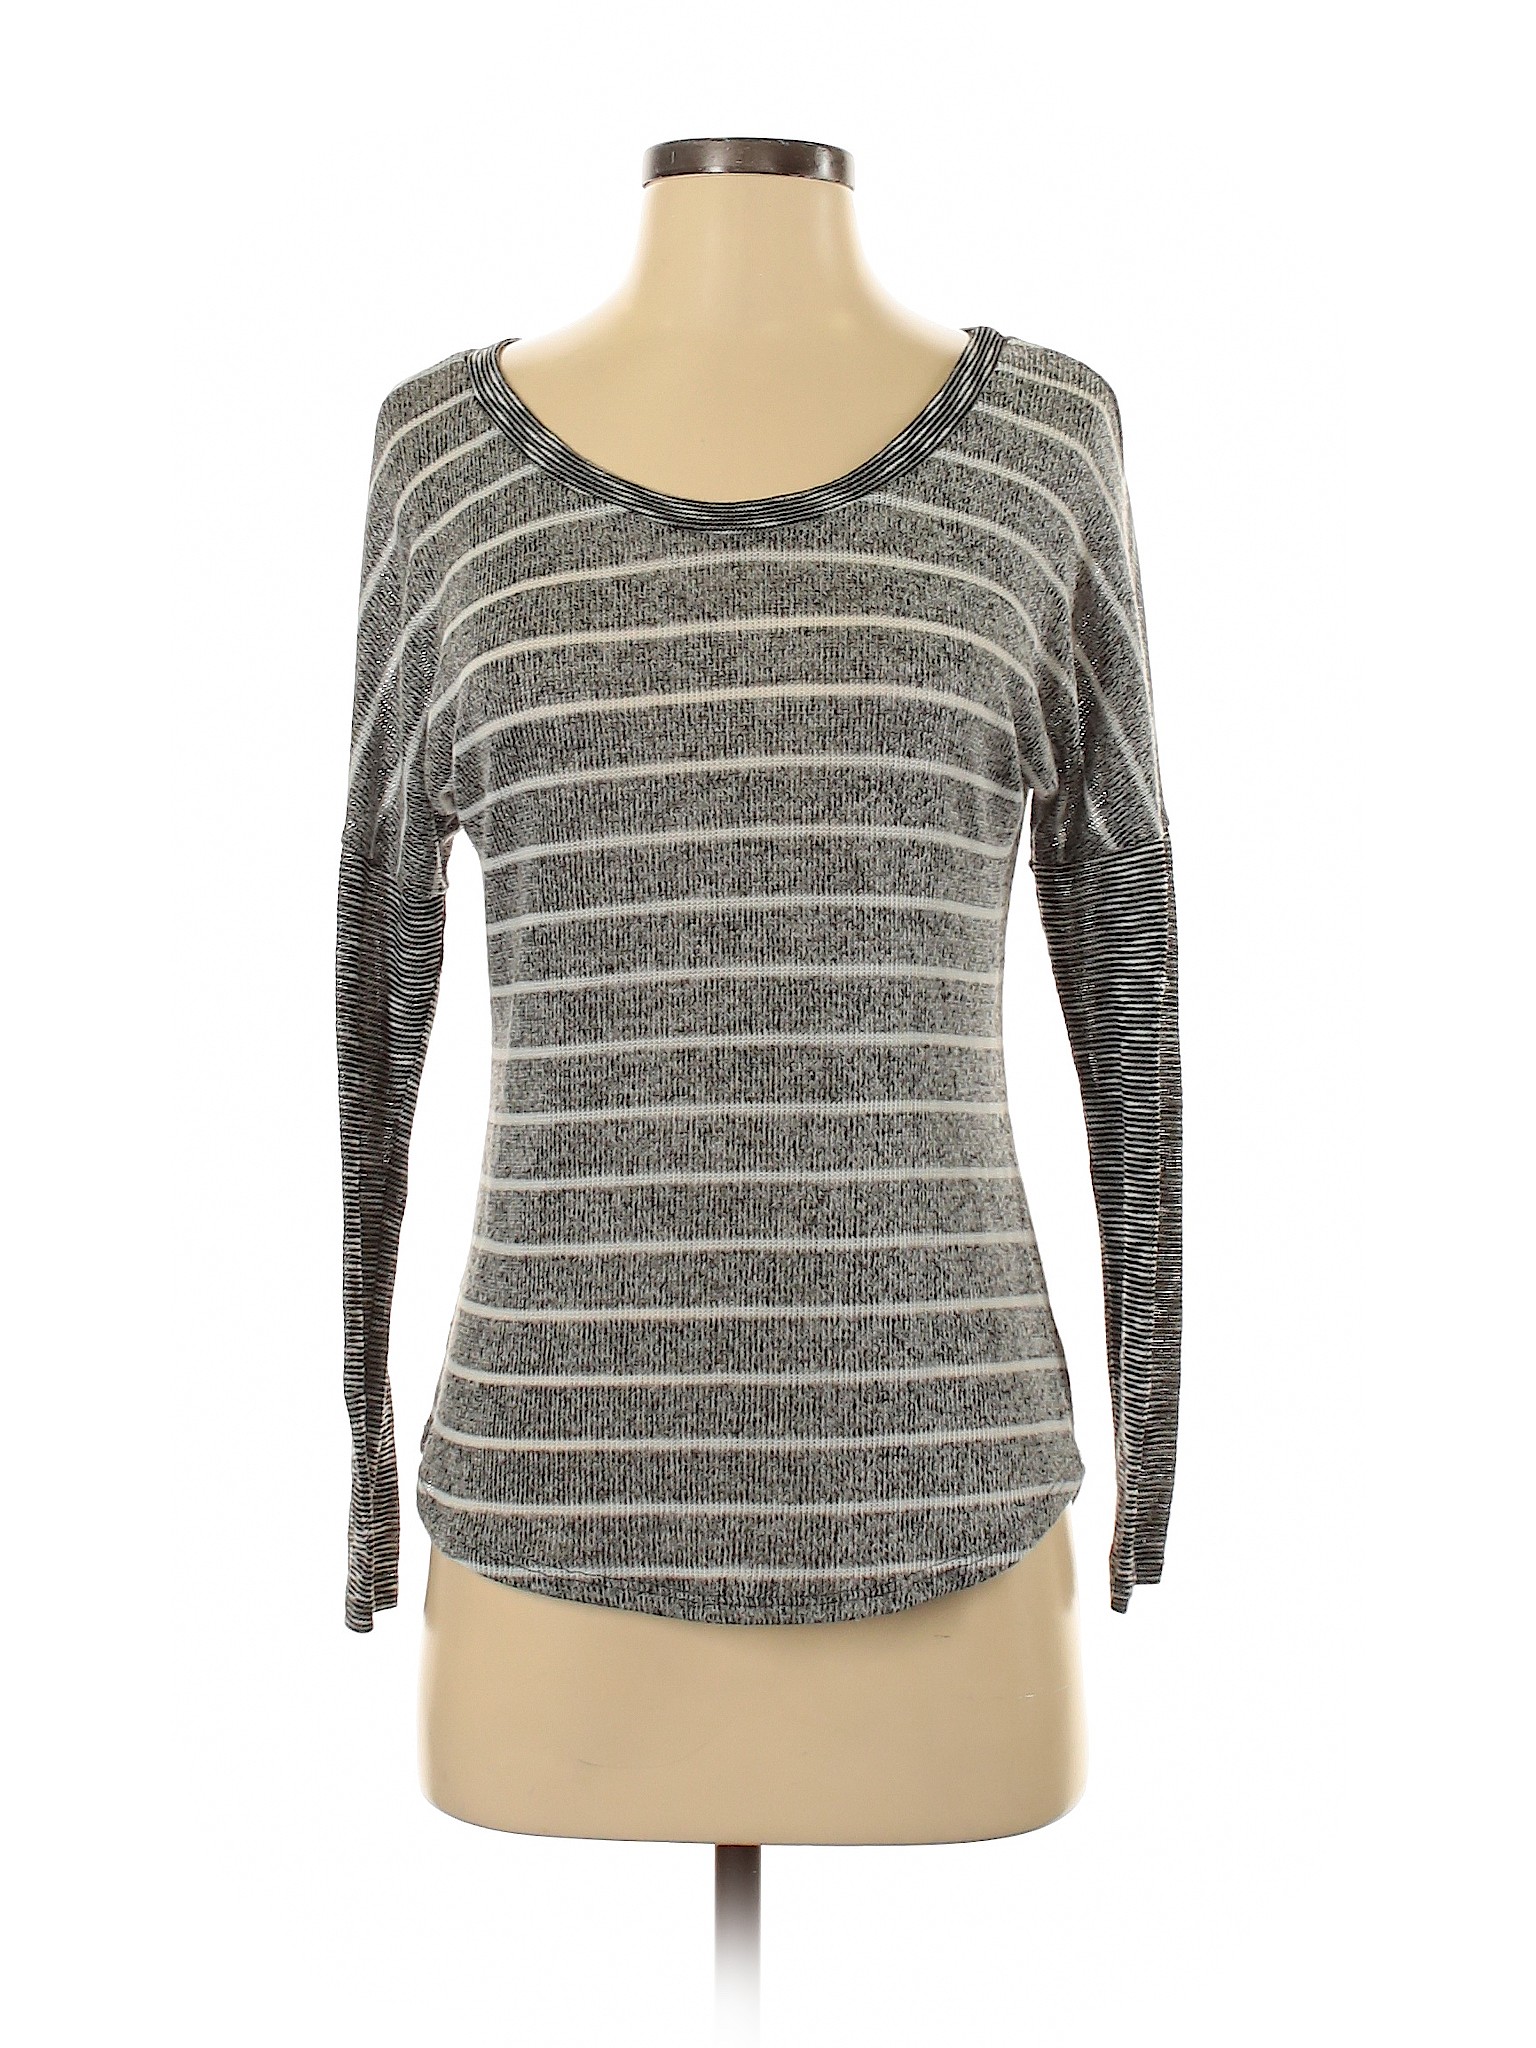 Maurices Women Gray Pullover Sweater S | eBay